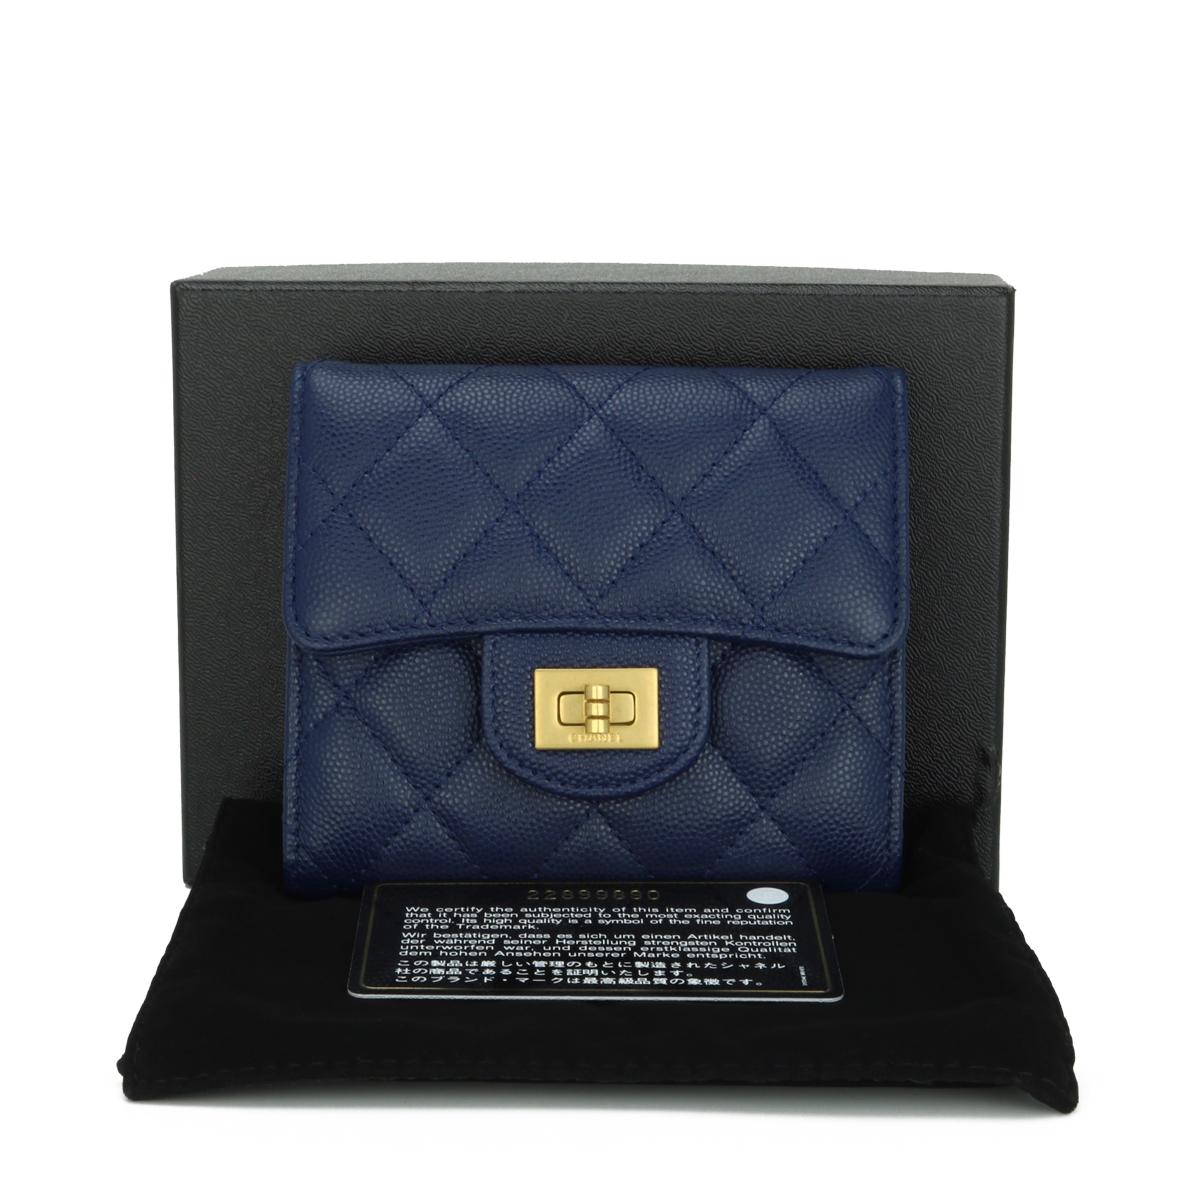 Chanel Quilted 2.55 Classic Small Flap Wallet in Navy Blue Caviar with Gold Hardware 2017.

This stunning classic wallet is in never worn condition. The wallet still holds its original shape, and the hardware is still very shiny.

- Exterior